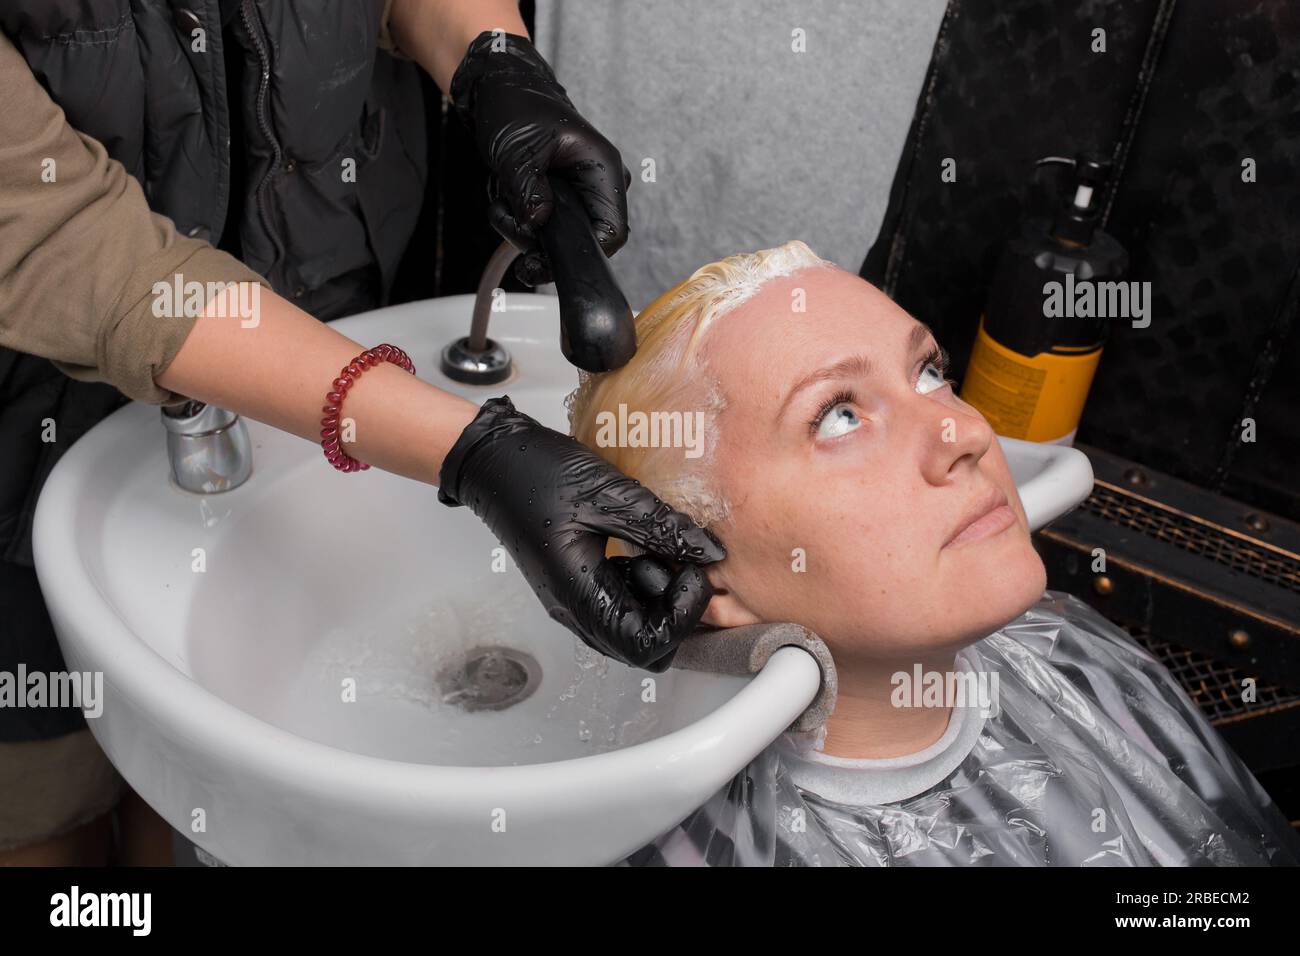 Washing the hair of an adult beautiful woman with rain over the sink at work in a barbershop or hairdresser. Stock Photo